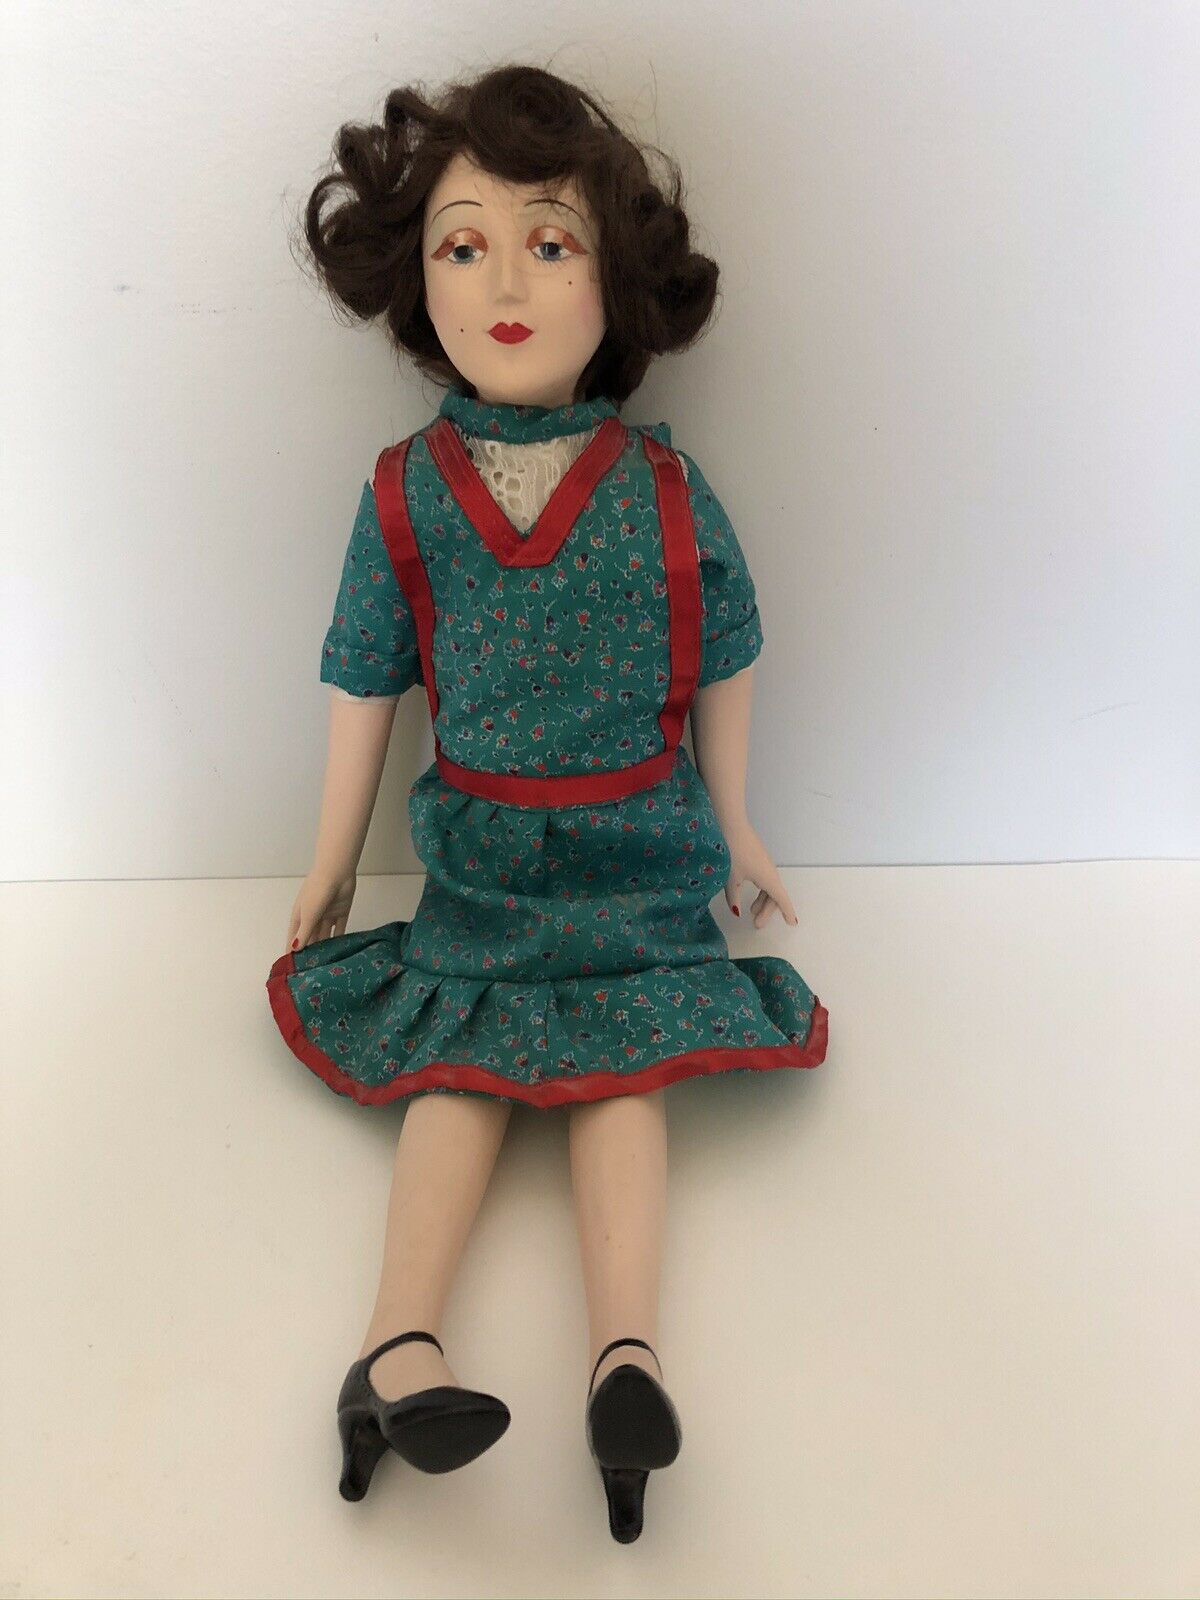 Handmade Bisque And Cloth Boudoir Doll